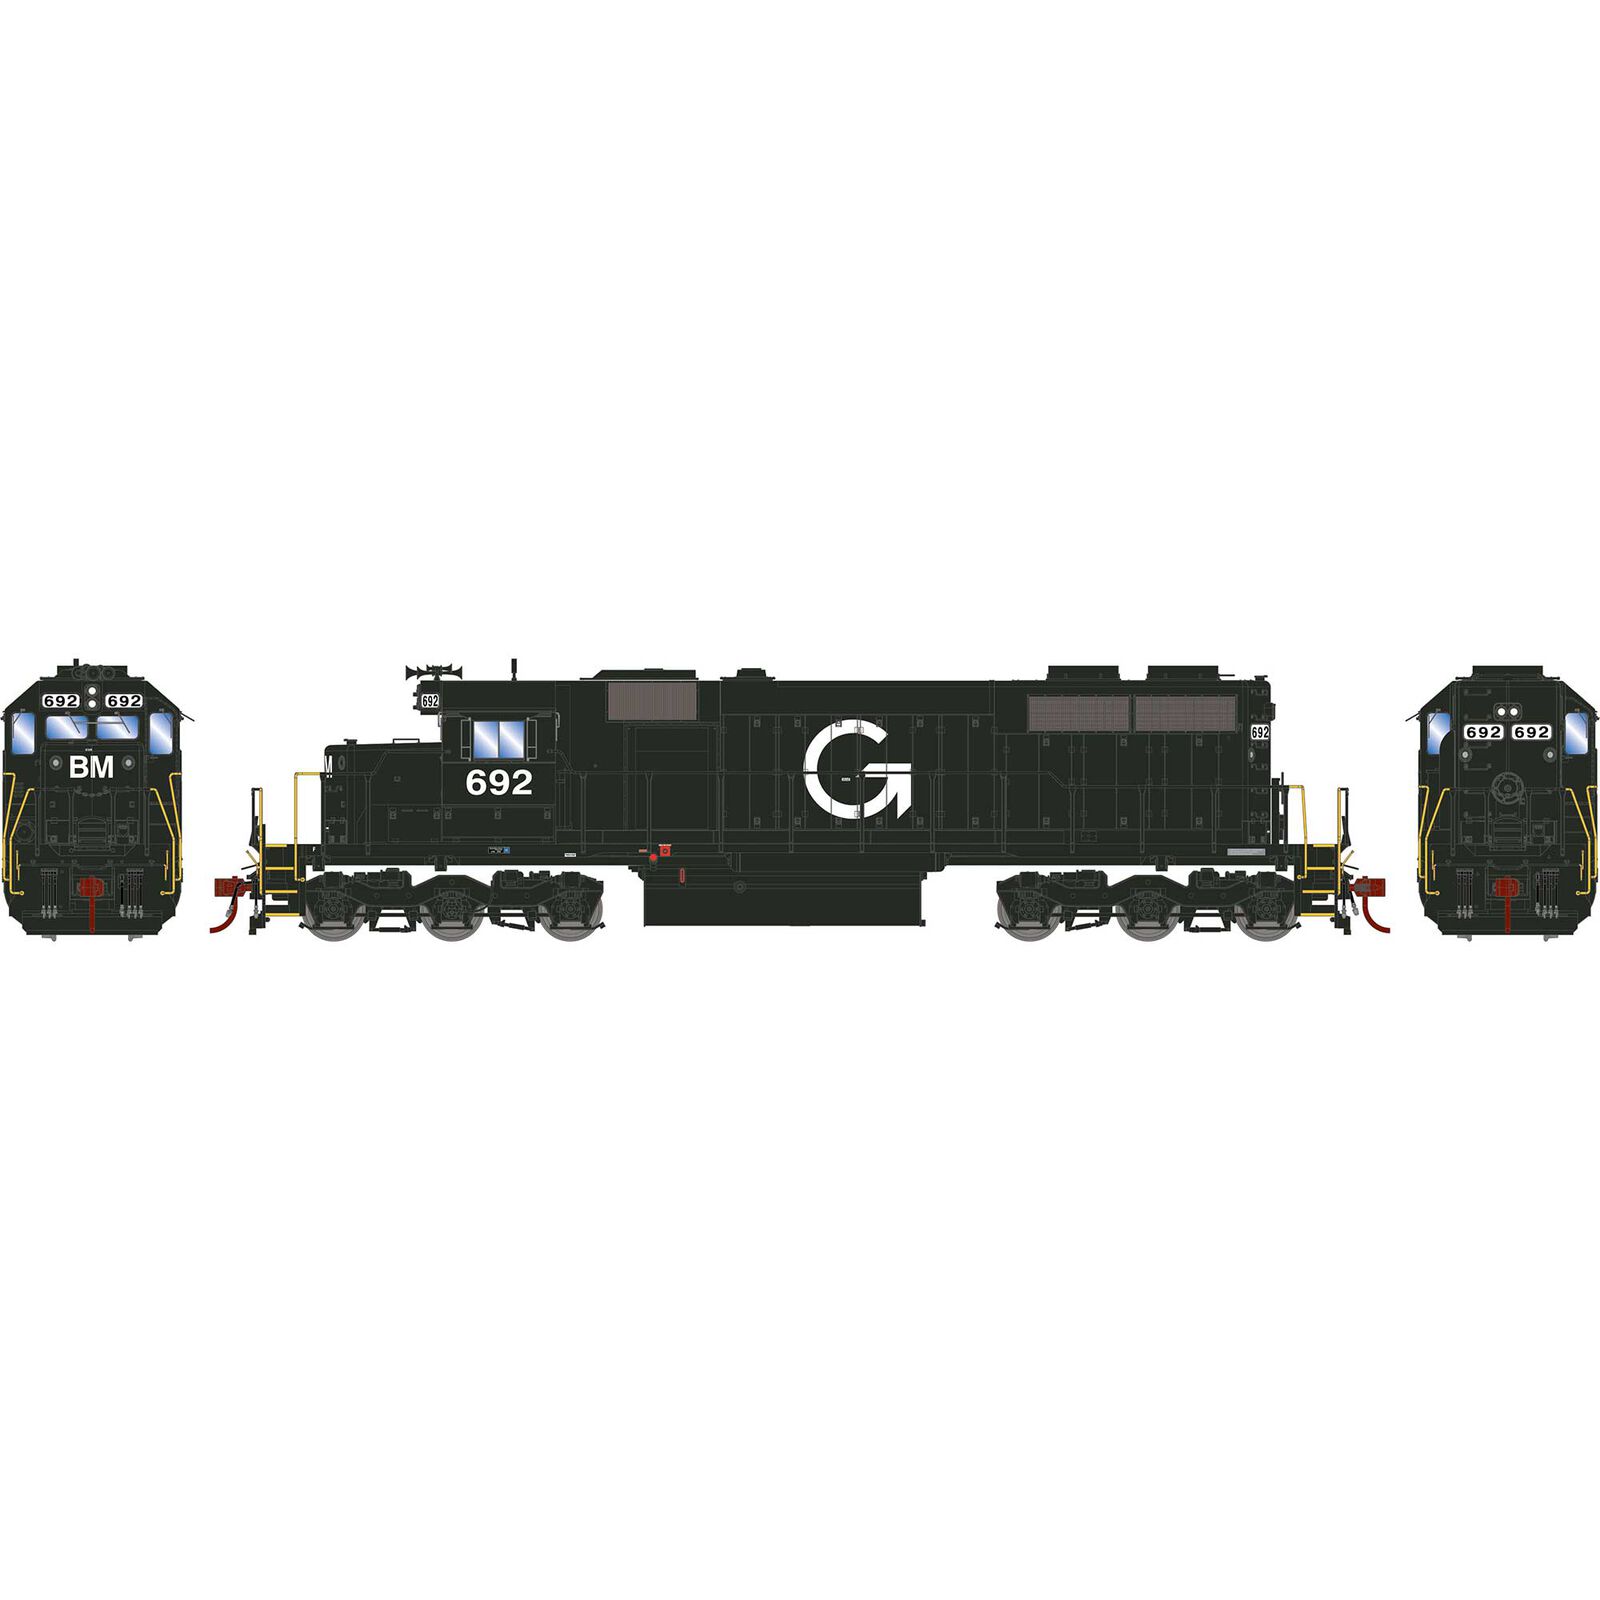 HO RTR SD39 with DCC & Sound, B&M #692